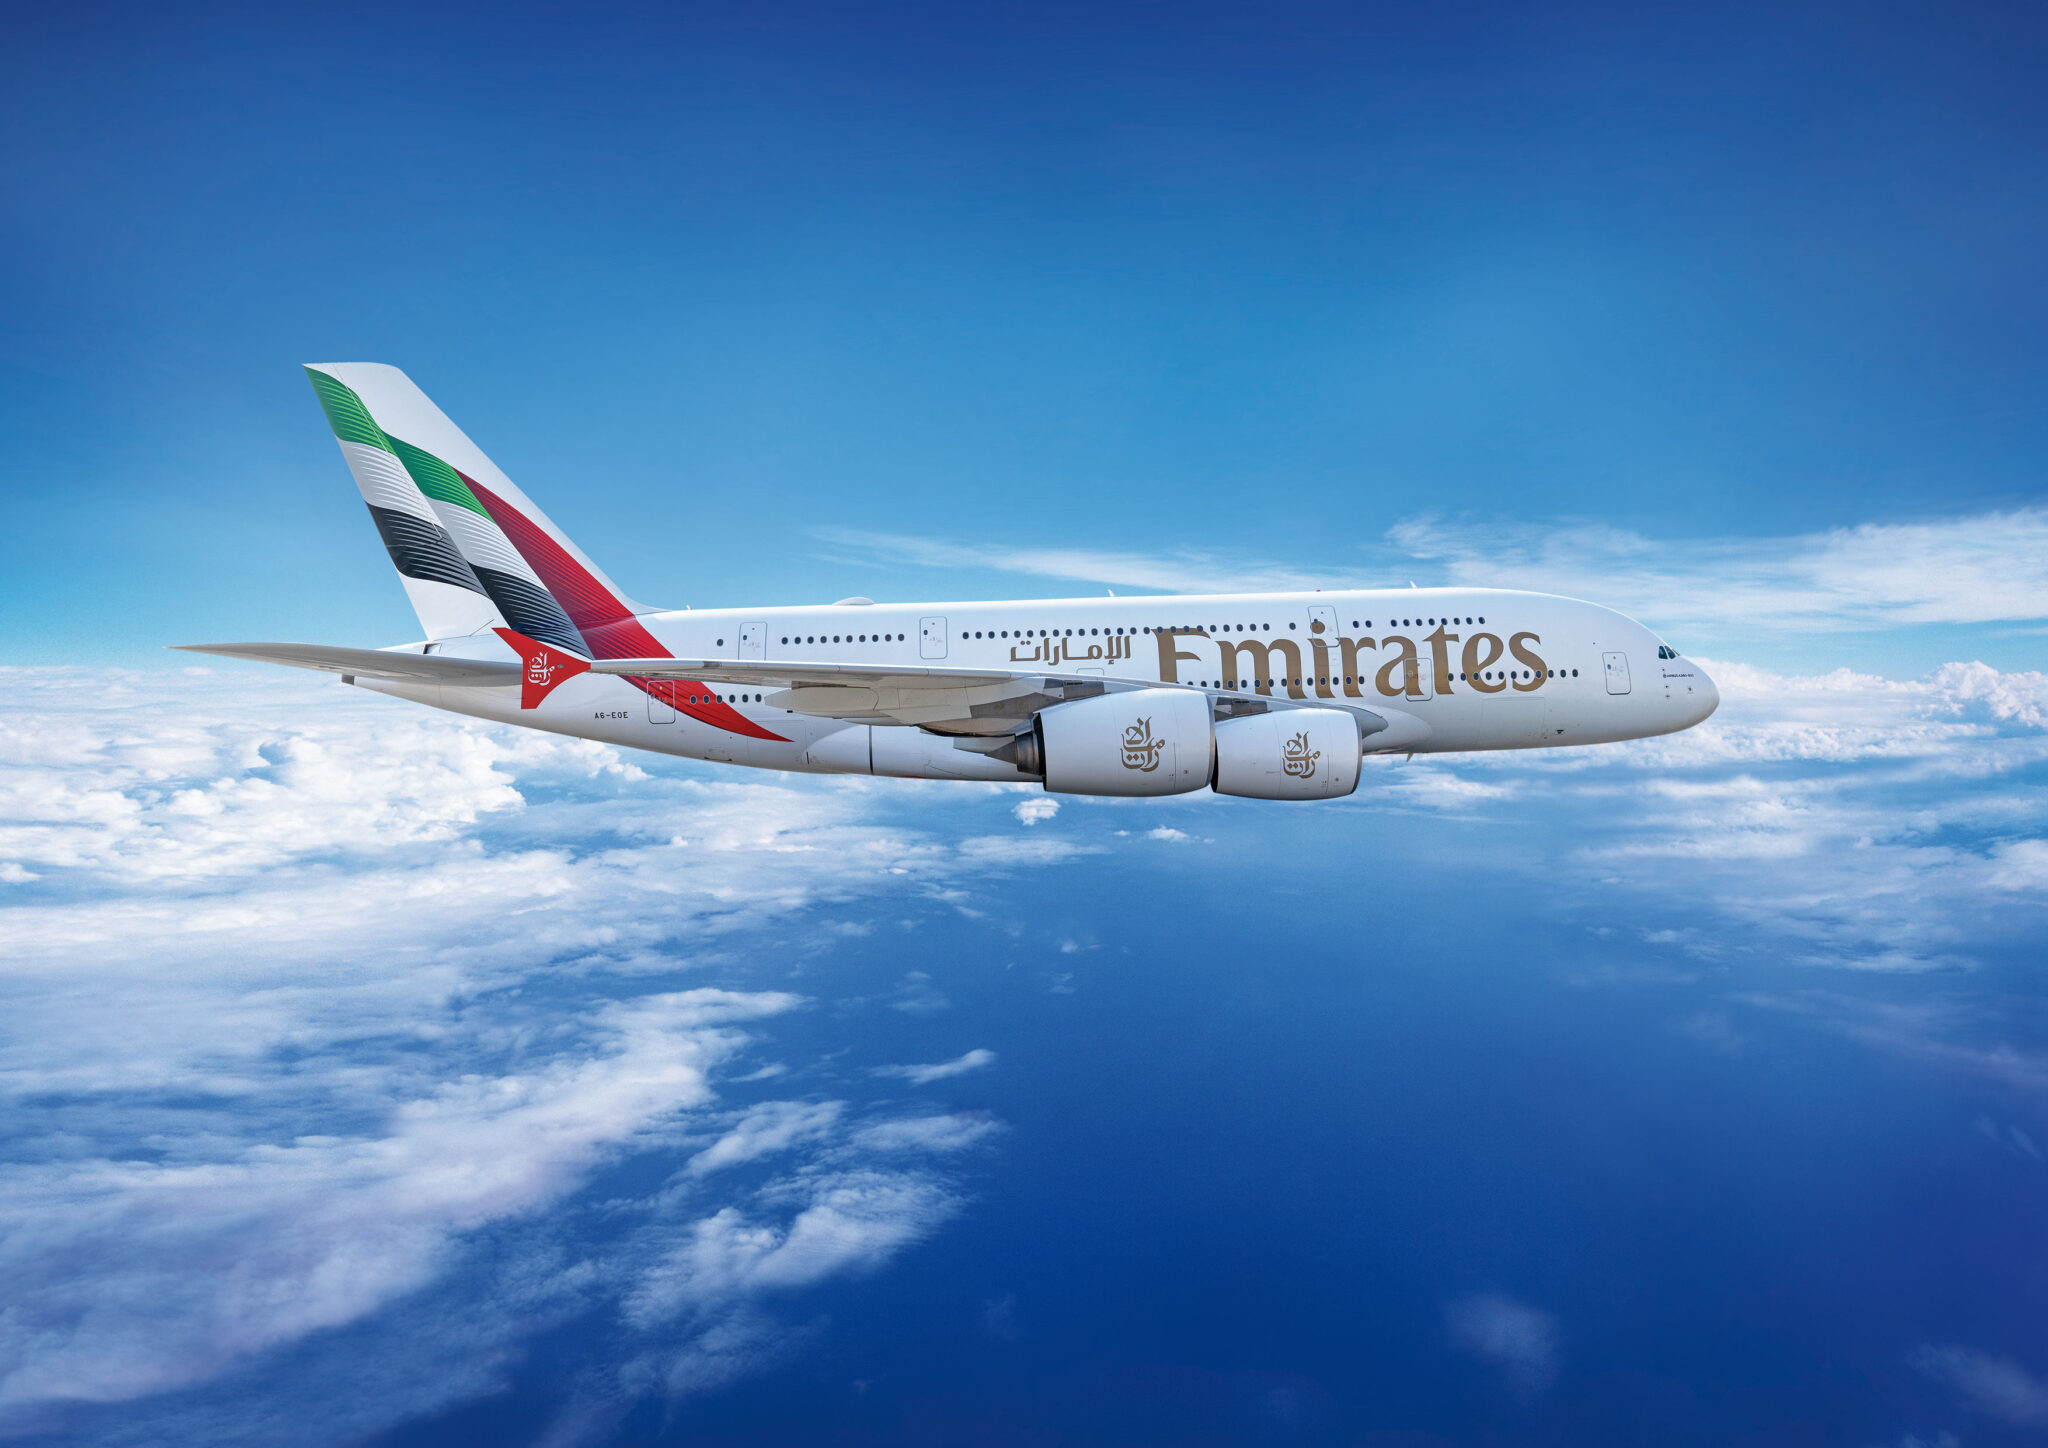 Emirates A380 new livery